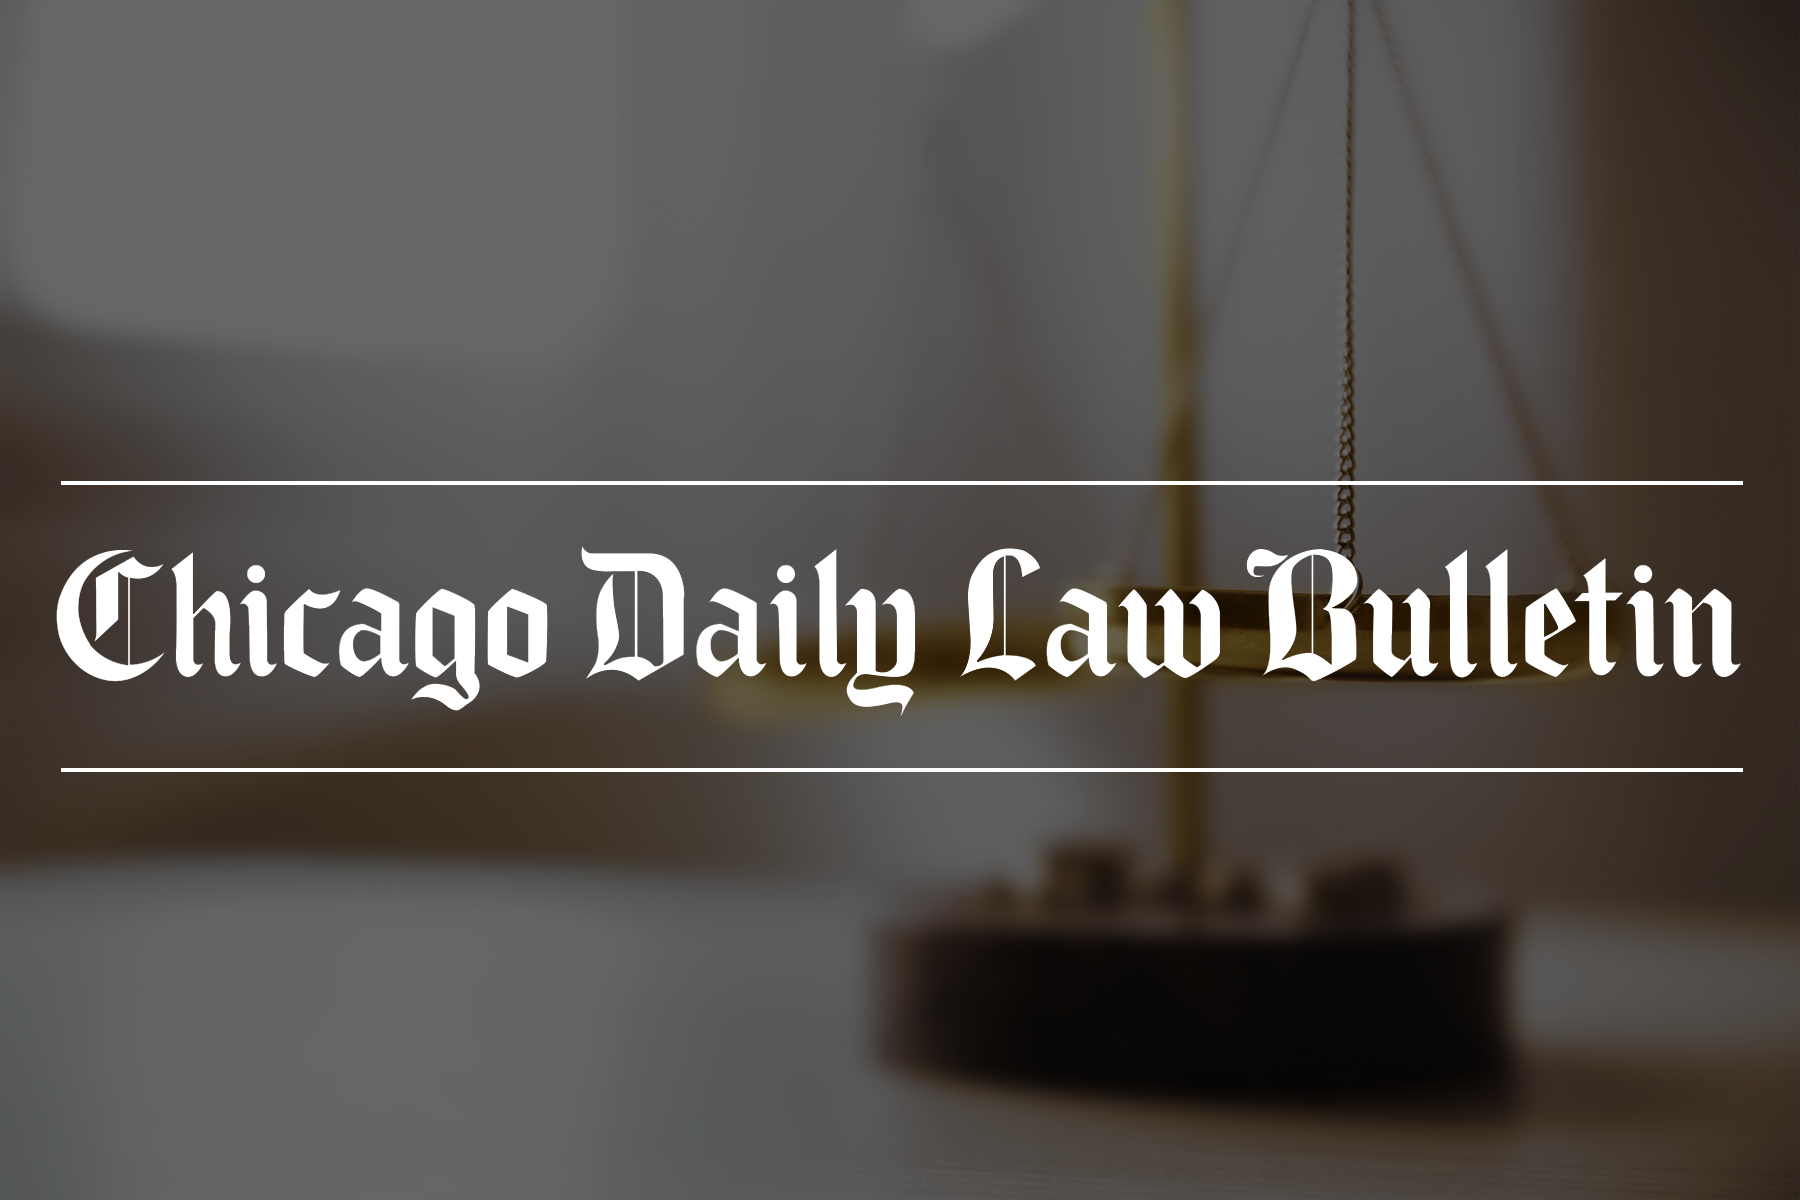 Chicago Daily Law Bulletin Features Rebrand Odelson, Murphey, Frazier